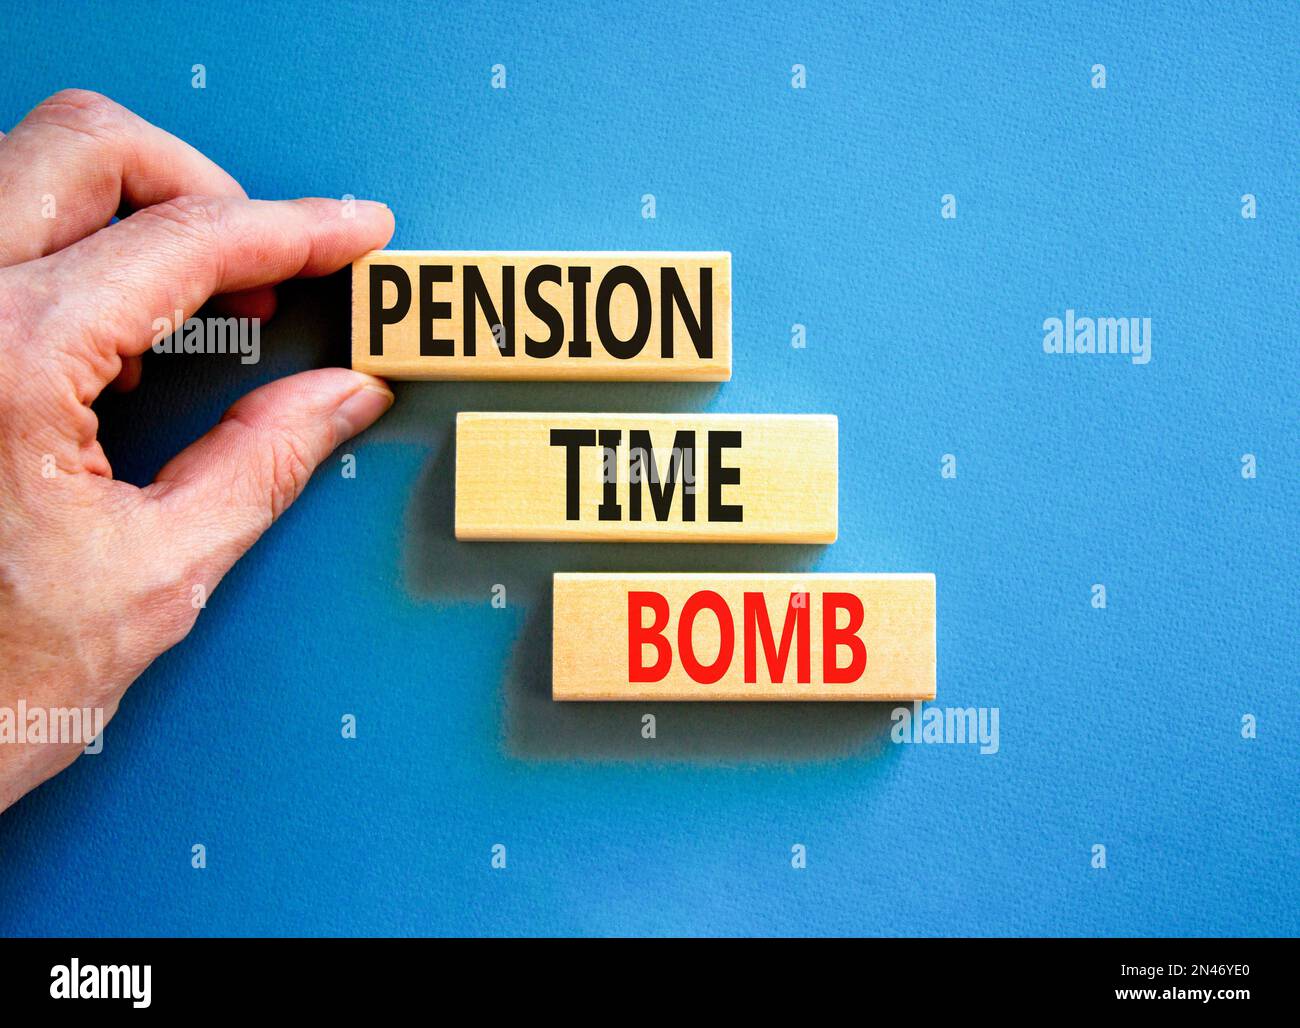 Pension time bomb symbol. Concept words Pension time bomb on wooden blocks on a beautiful blue table blue background. Businessman hand. Business pensi Stock Photo